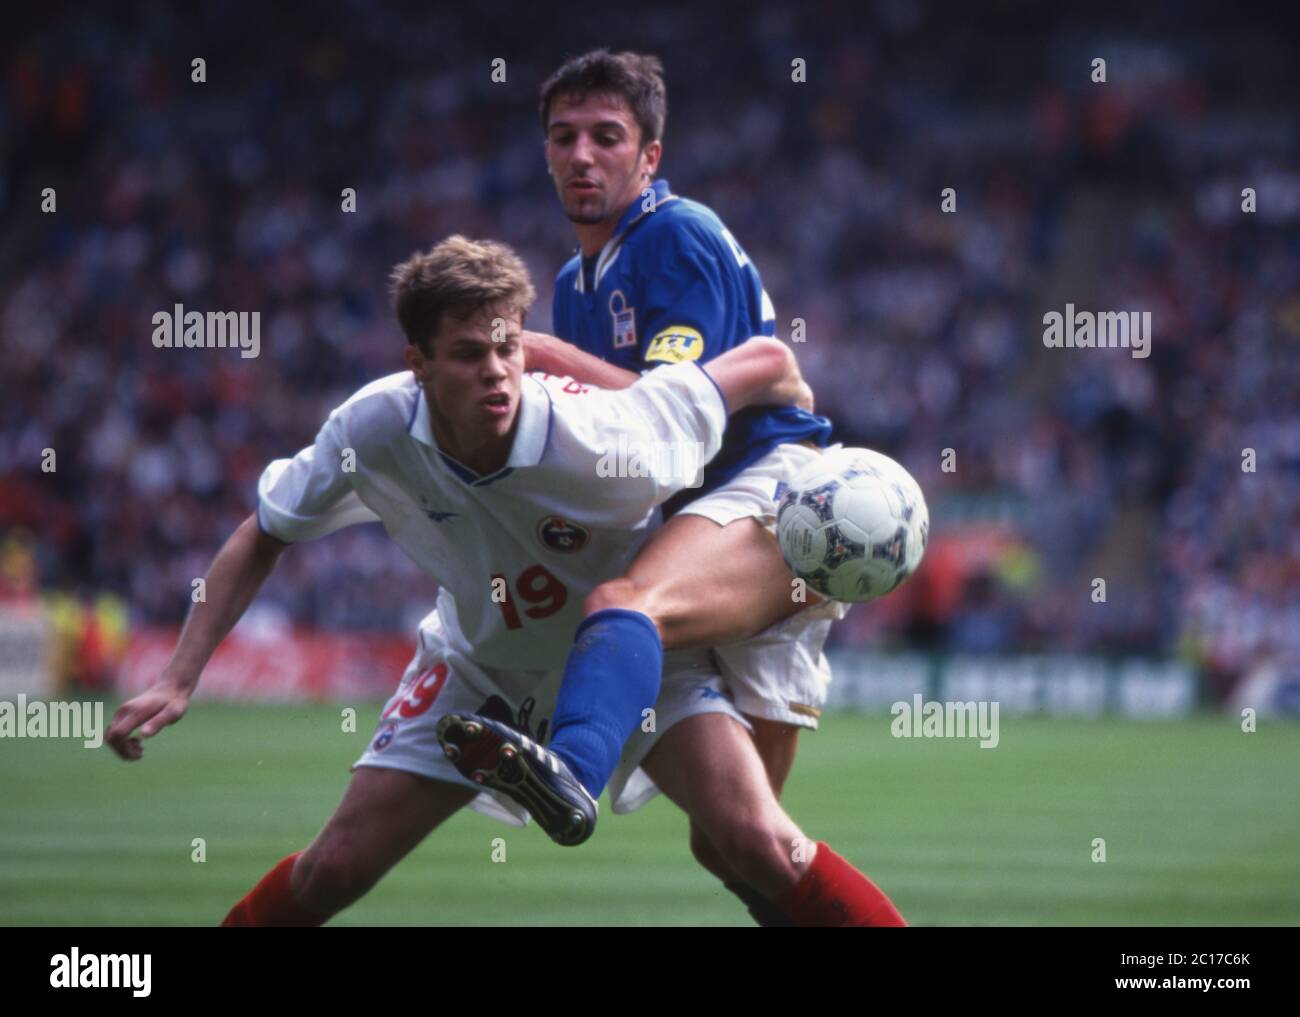 Grossbritannien. 12th Apr, 2020. Football, firo: 11.06.1996 European Football Championship Euro Euro 1996 group stage, group 3, group C, archive photo, archive pictures Italy - Russia 2-1 duels, Alessandro Del Piero, versus, Vladislav Radimov | usage worldwide Credit: dpa/Alamy Live News Stock Photo